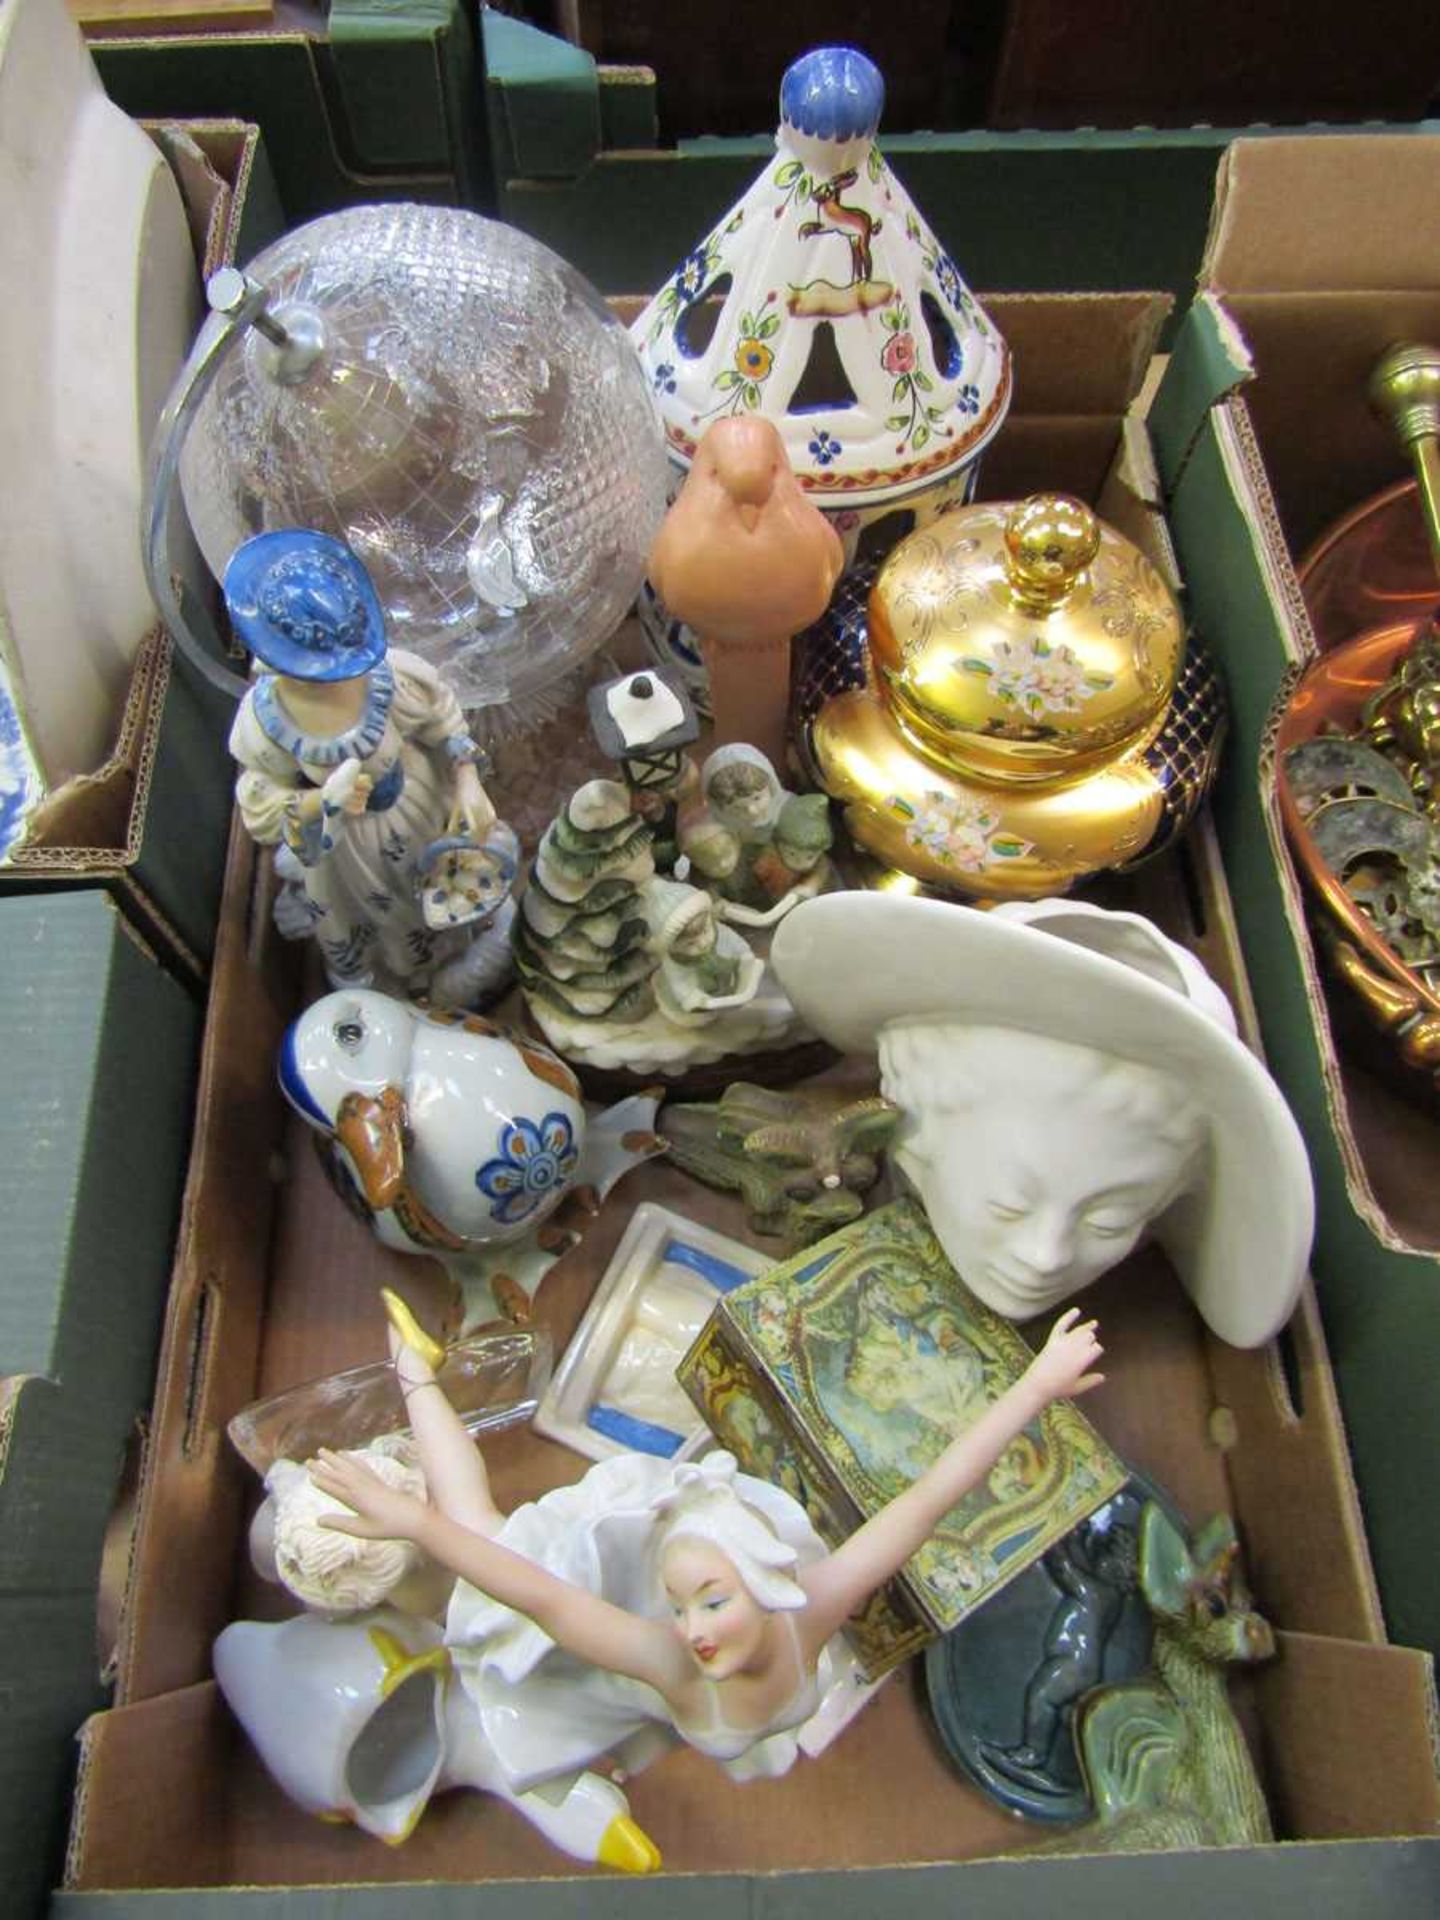 A tray containing decorative ceramic ware to include figurines, cut glass globe, gilt and blue glass